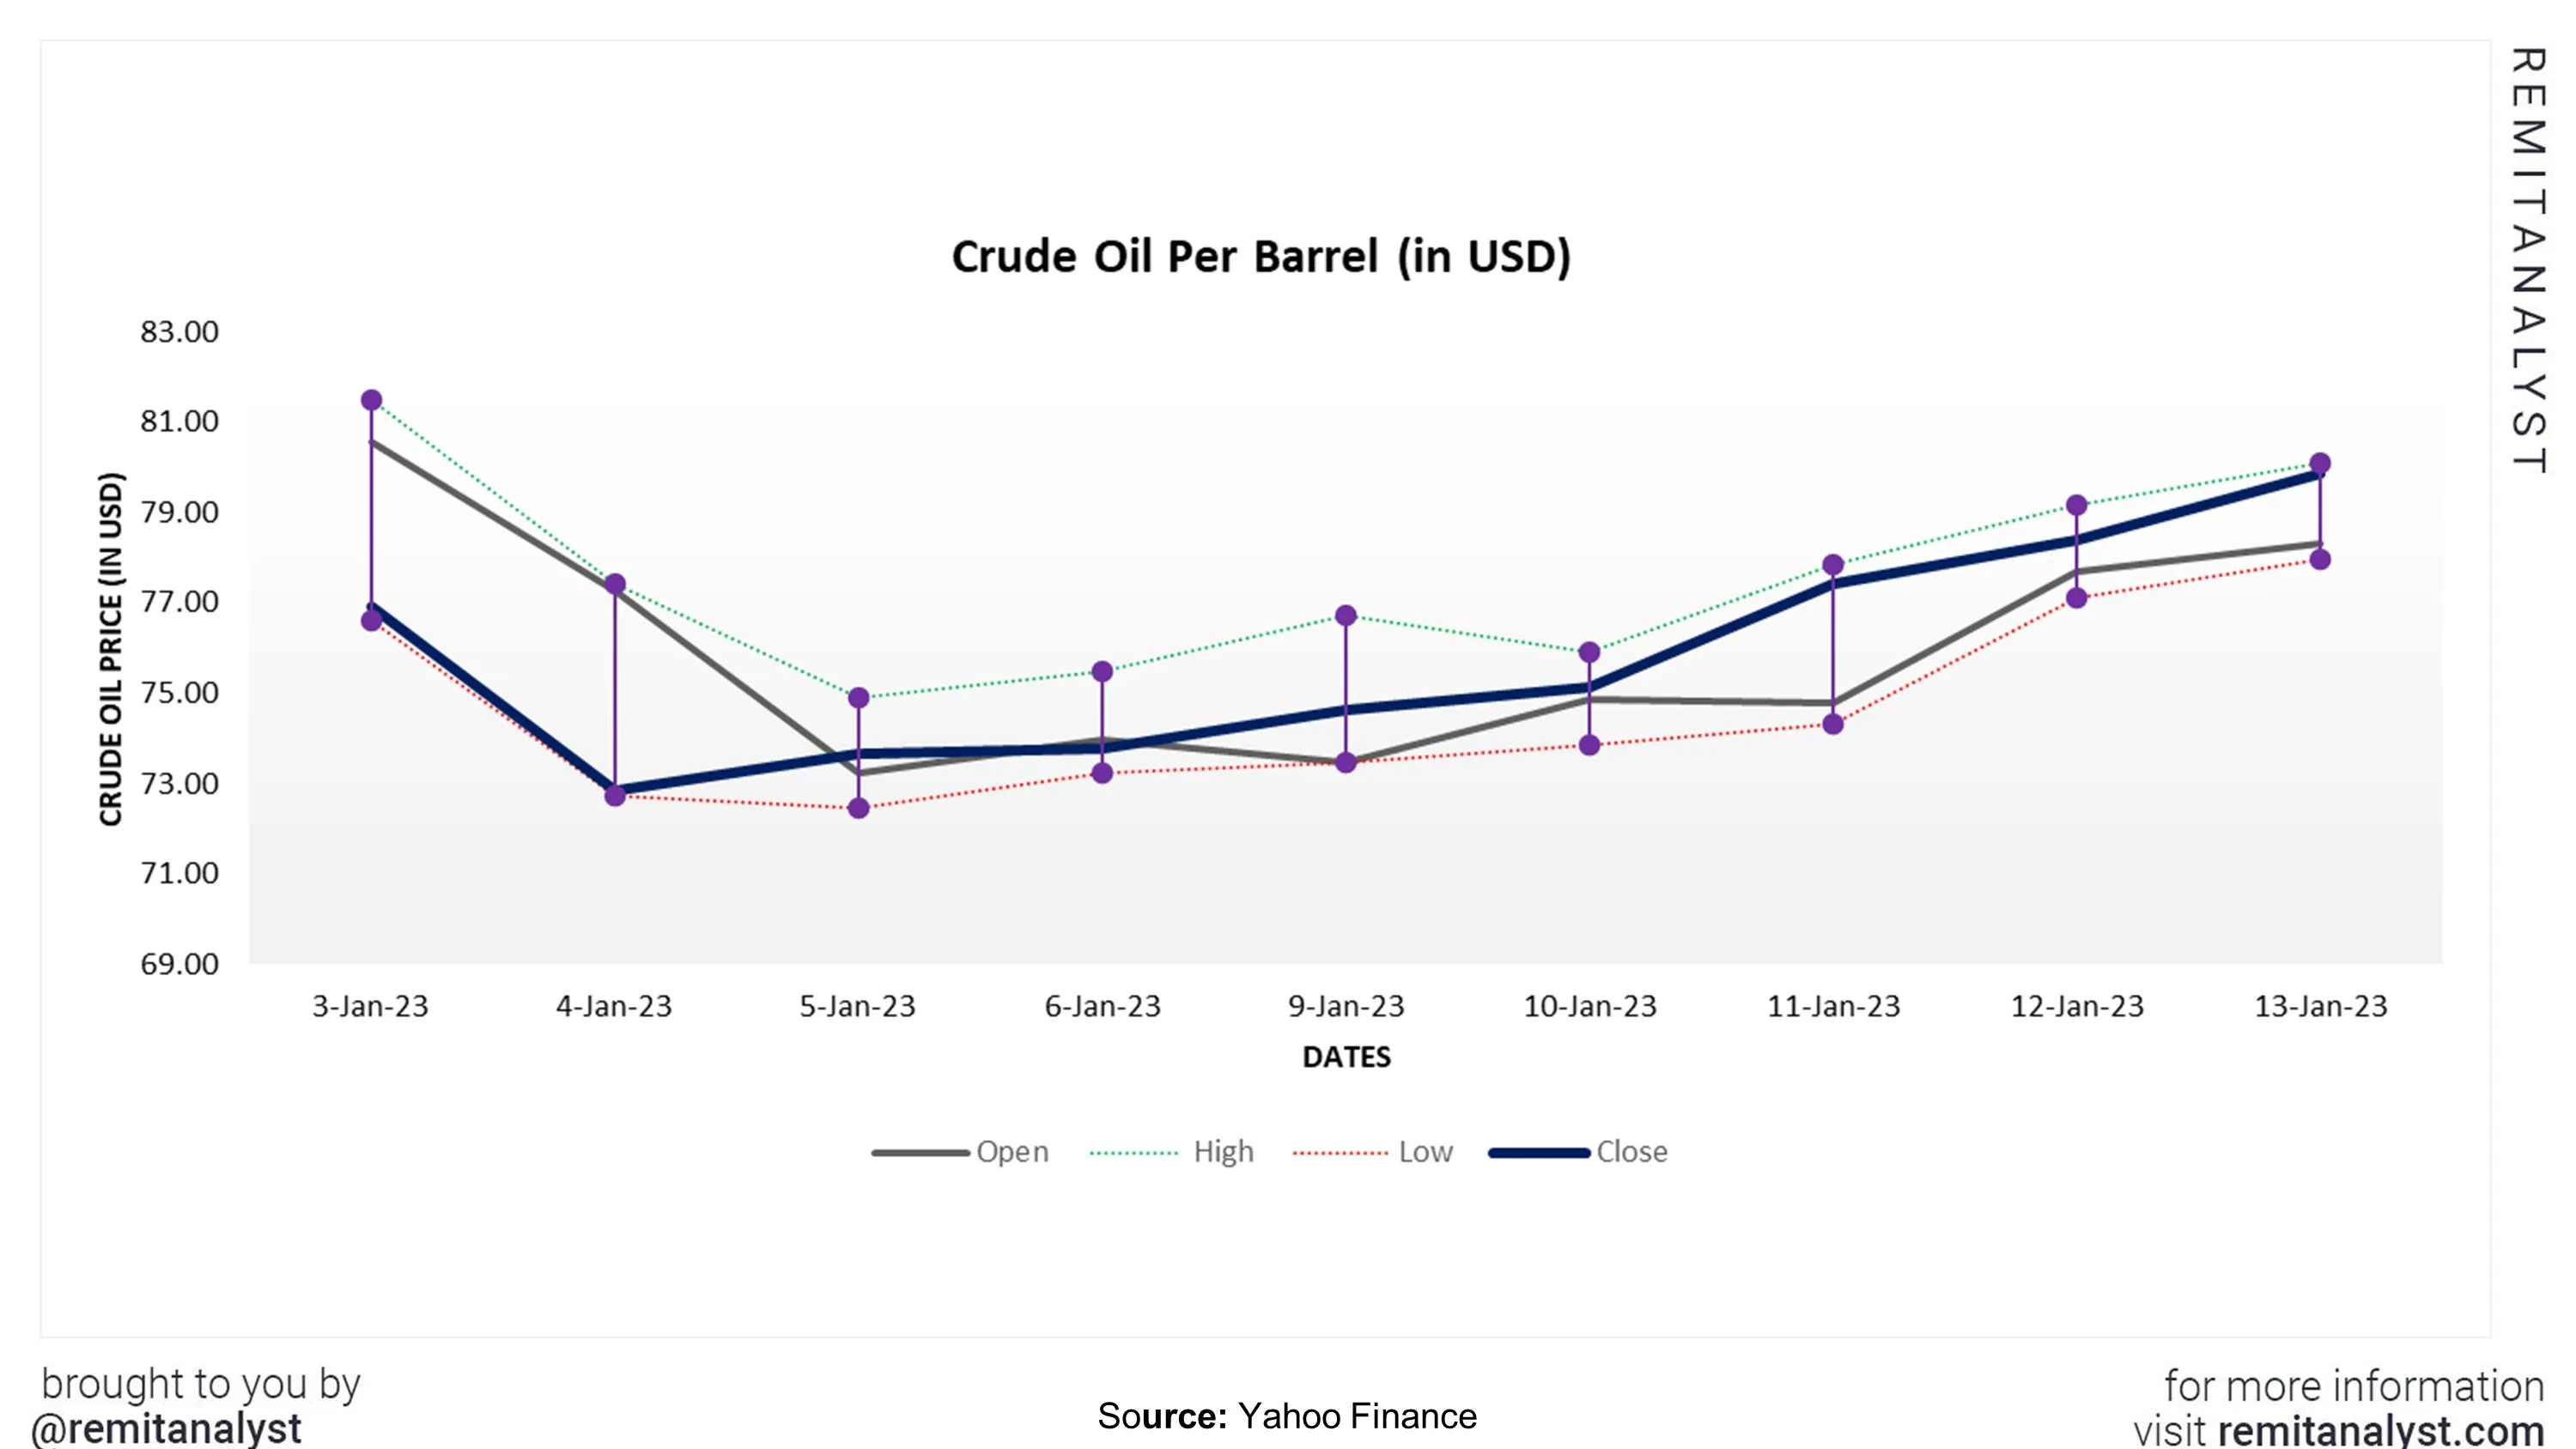 crude-oil-prices-from-3-jan-2023-to-13-jan-2023